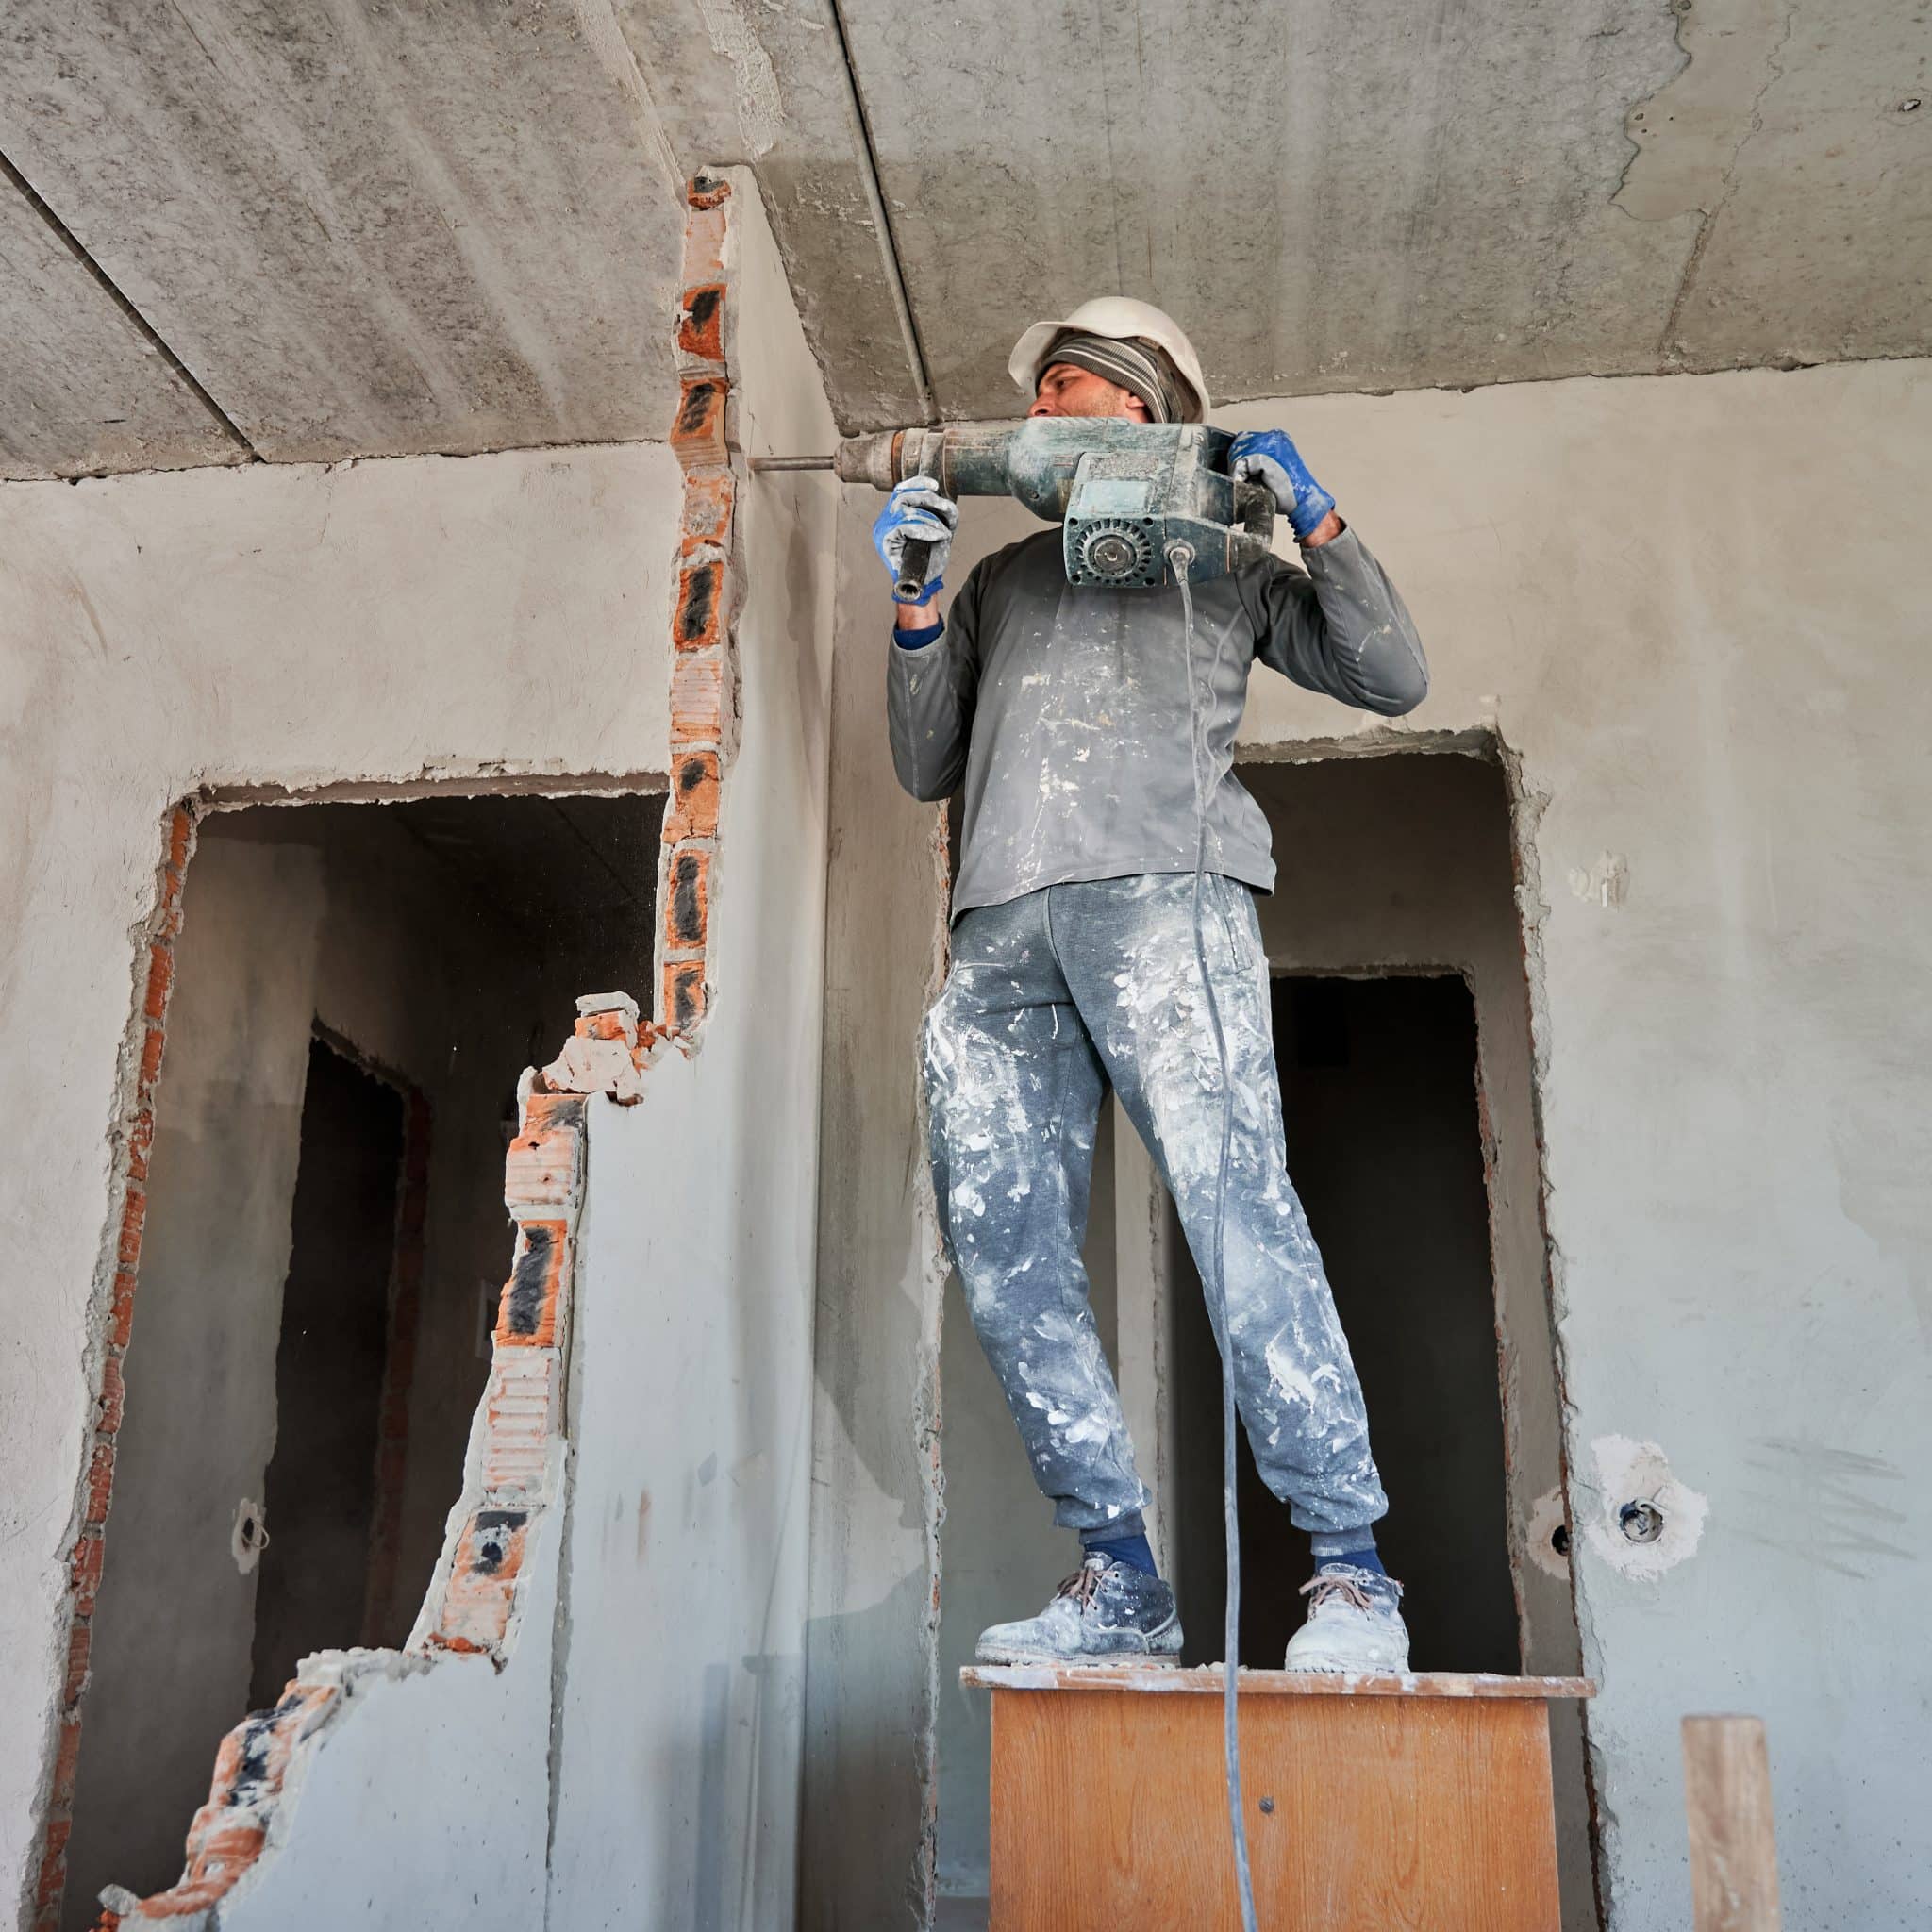 Full length of man in workwear drilling wall with hammer drill. Male worker using drill breaker while destroying wall in apartment under renovation. Demolition work and home renovation concept.